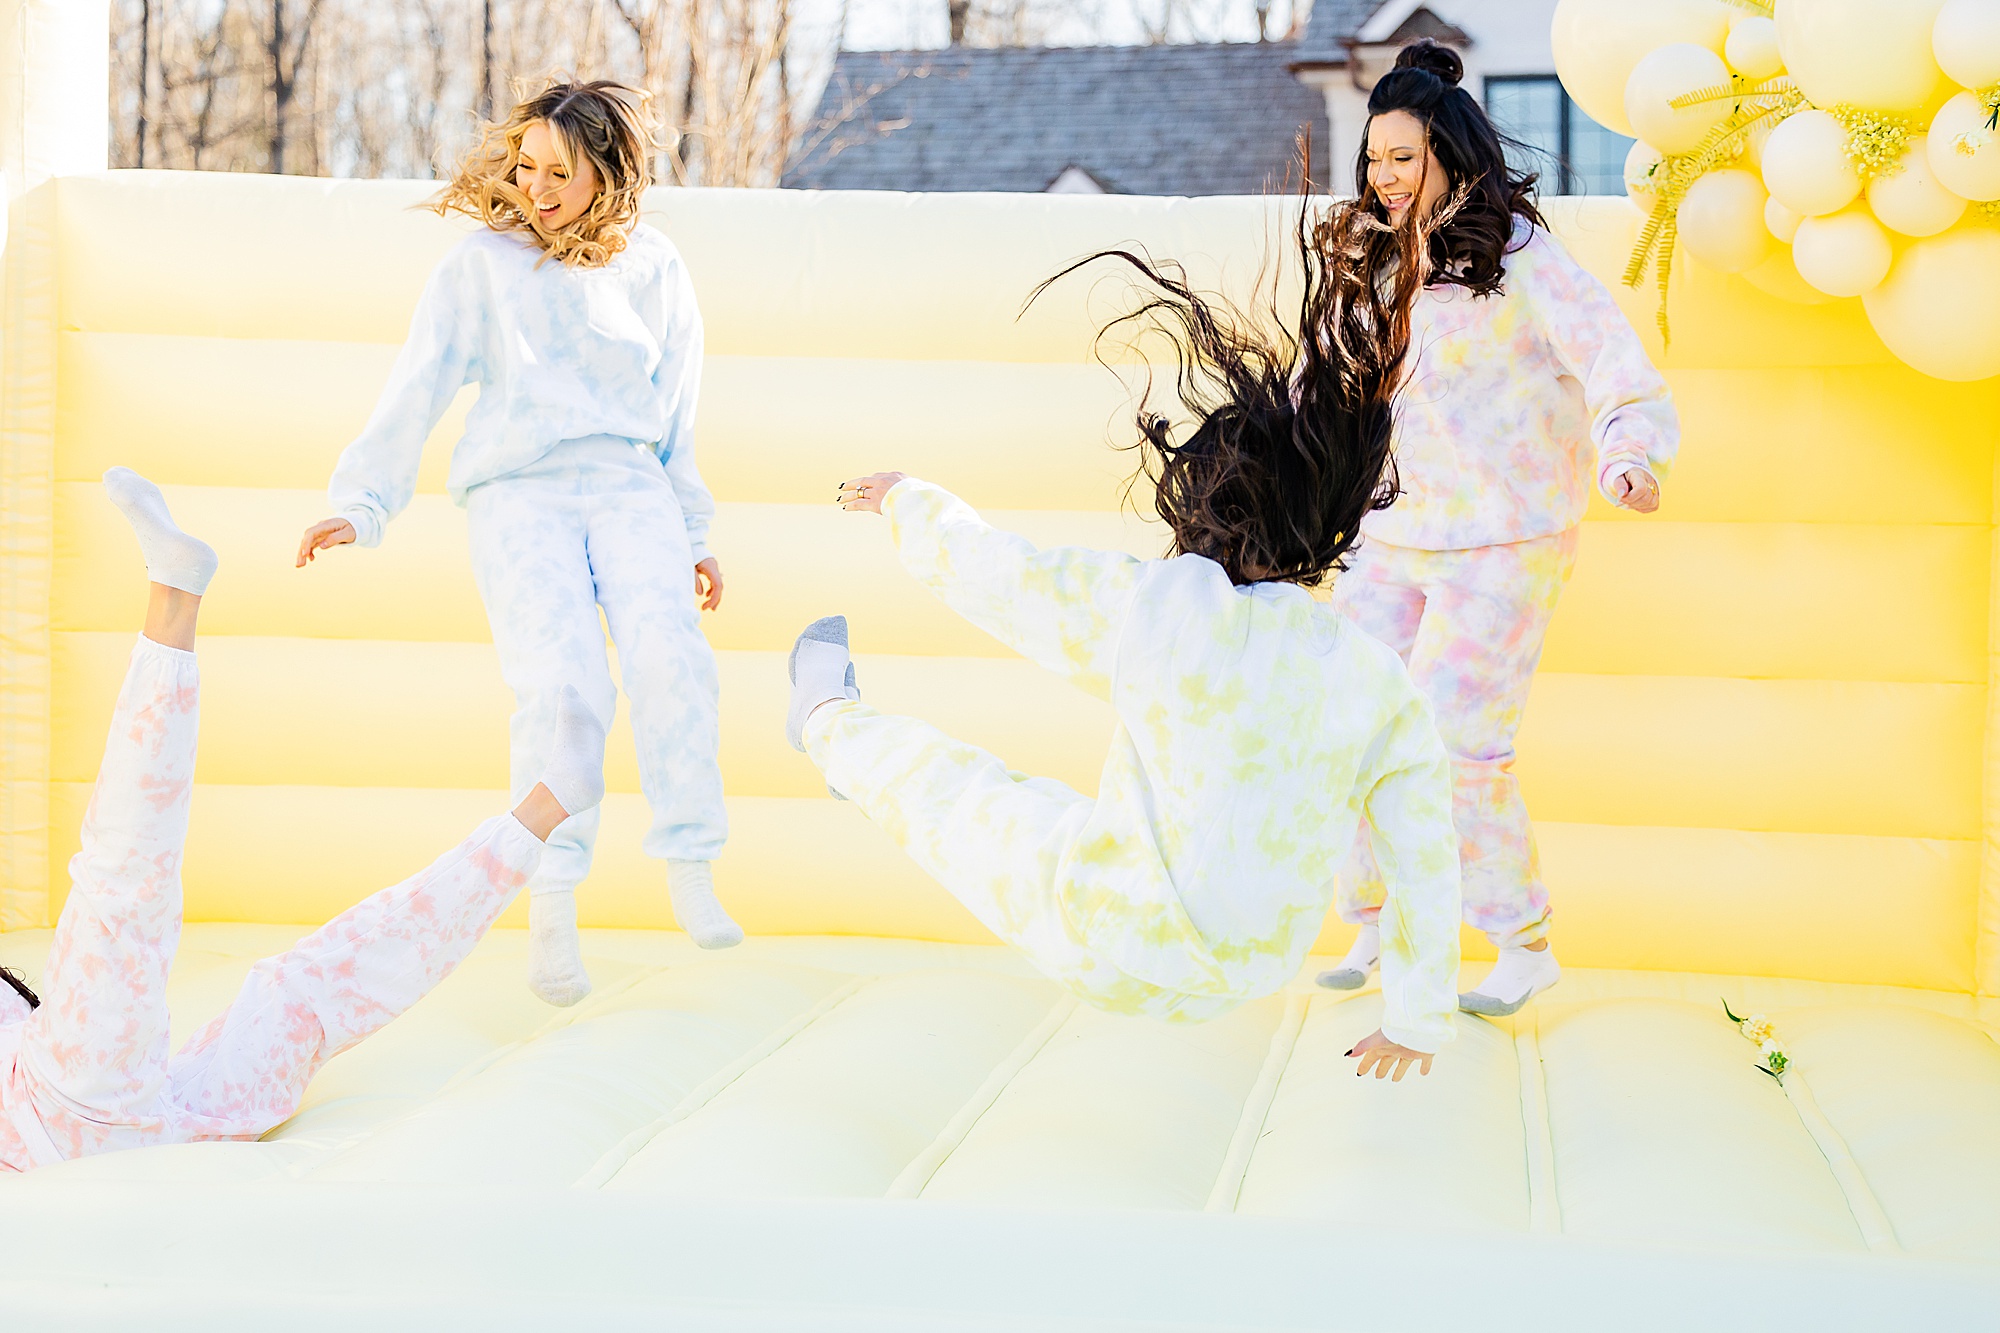 women bounce during branding session for bounce houses